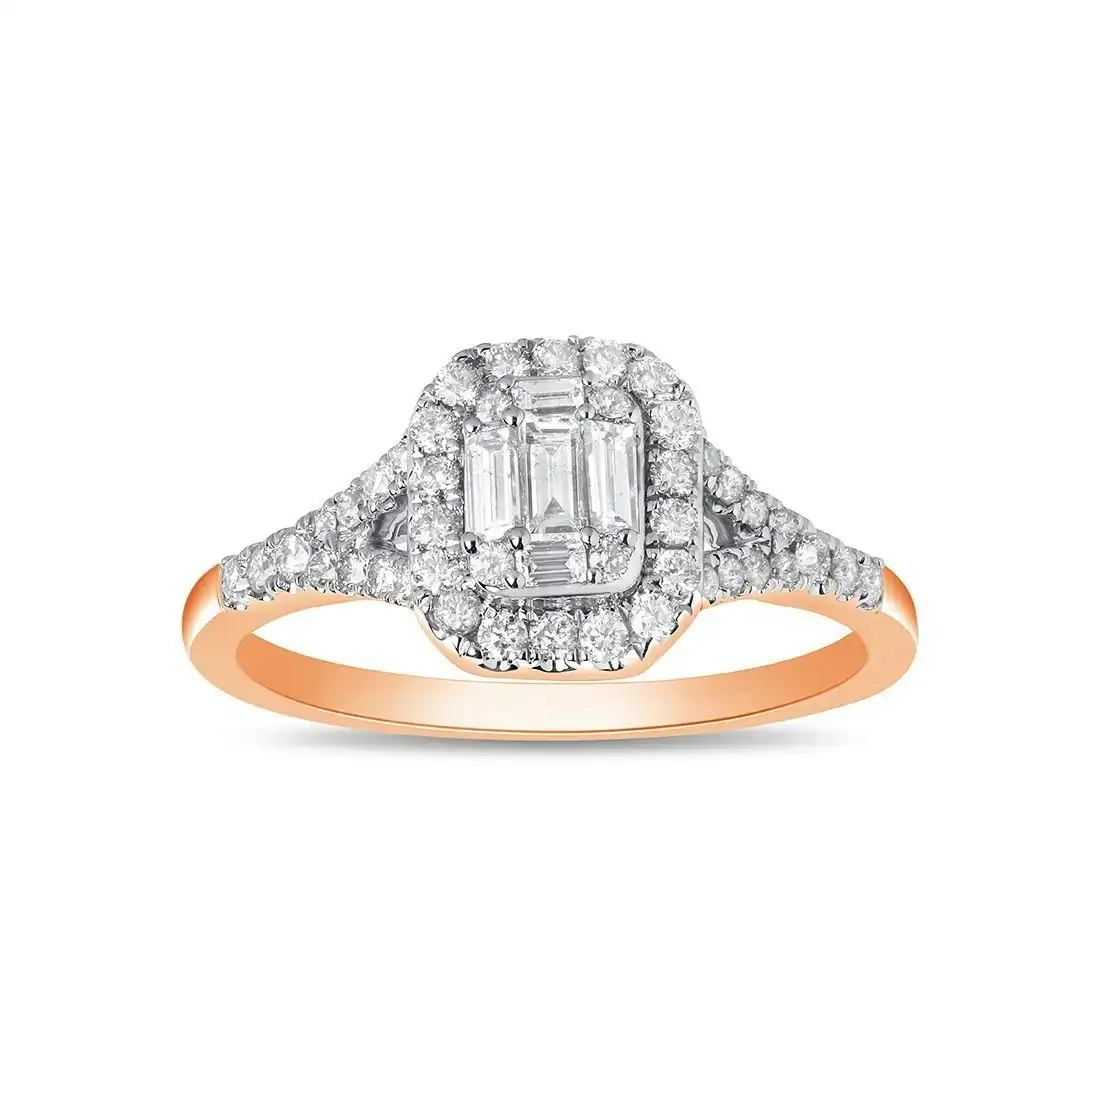 Surround Ring with 1/2ct of Diamonds in 9ct Rose Gold